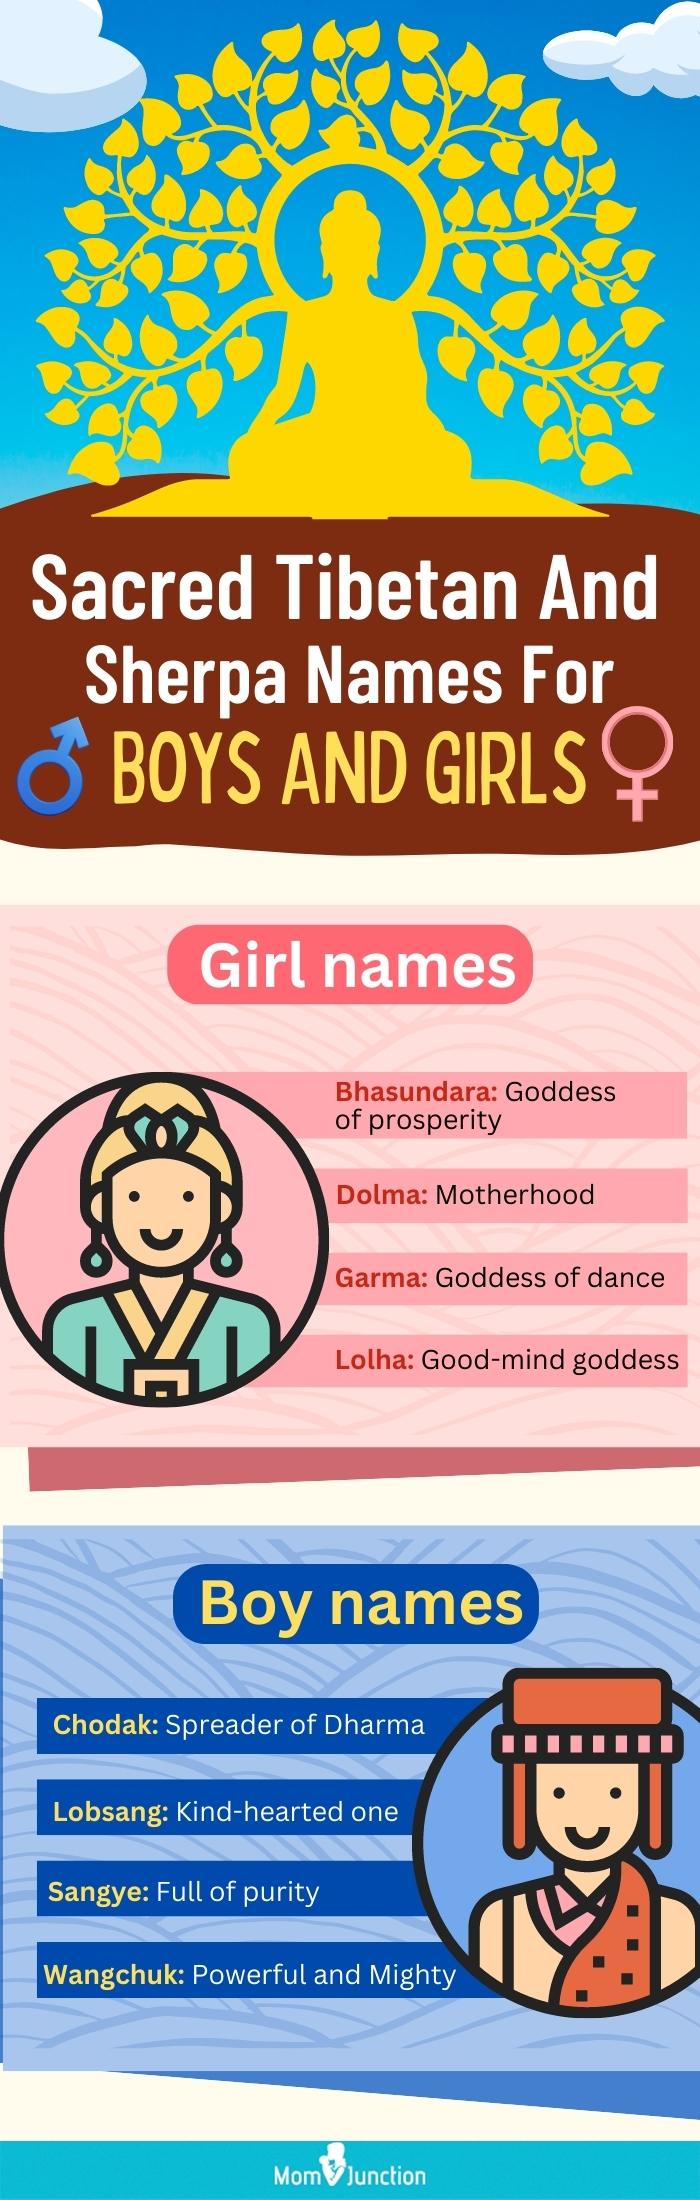 sherpa names for boys and girls (infographic)